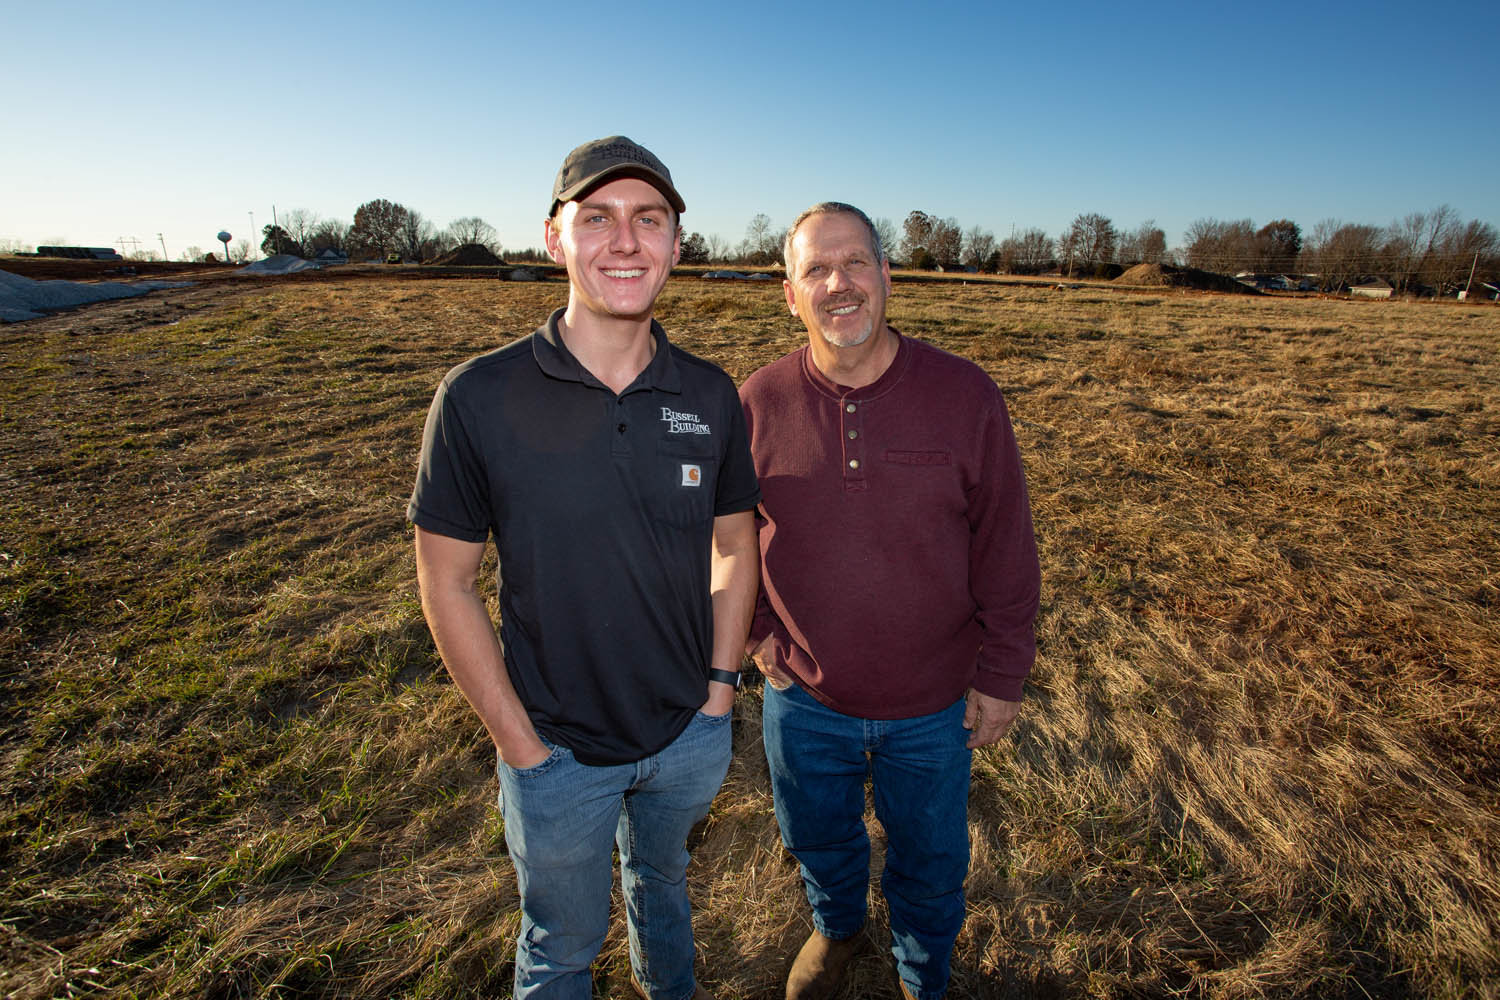 Bussell Building, led by Tyler, left, and Kenny Bussell, is developing on 200 acres in Battlefield to fill a housing shortage in the area. They’re pictured above in December 2019.